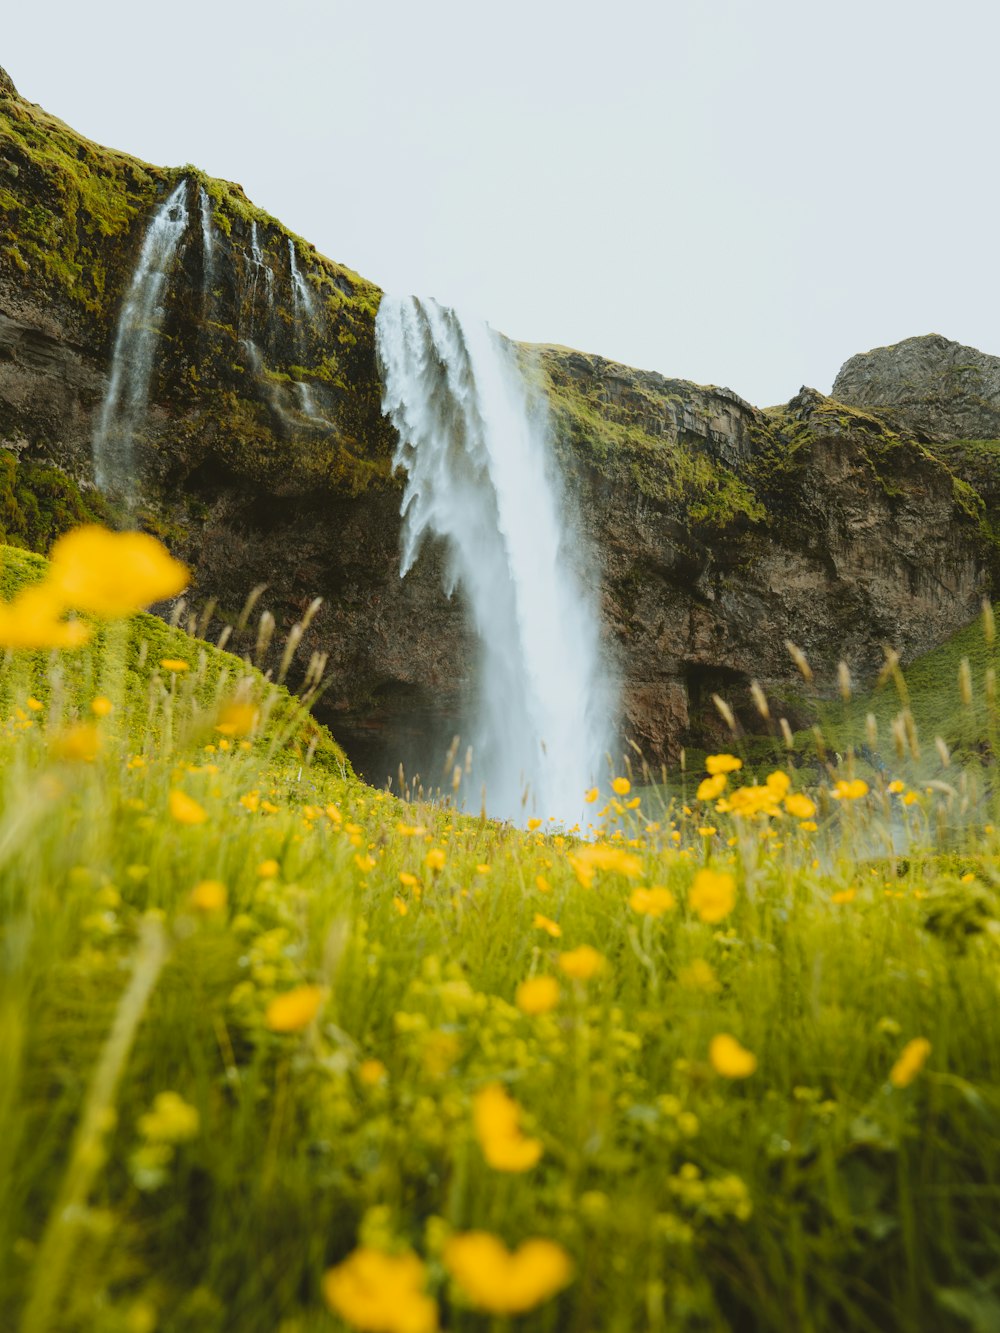 a waterfall in a grassy area